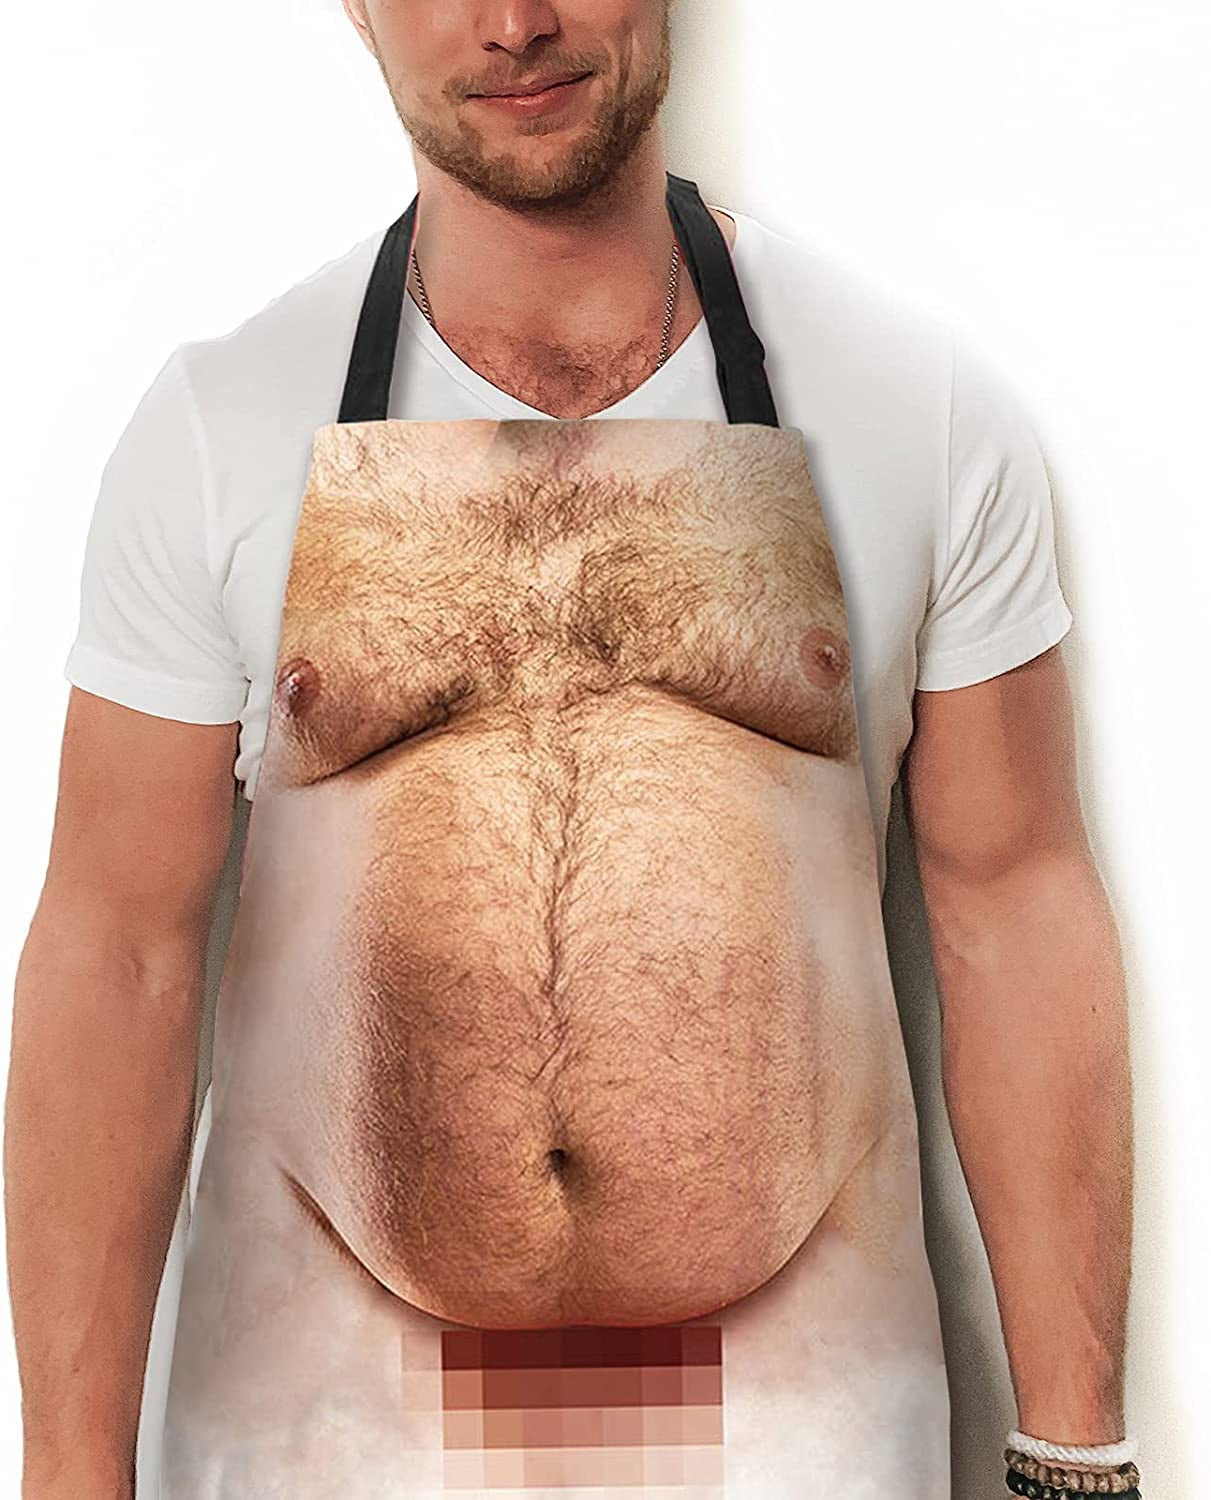 Funny Men Cooking Grilling Aprons Belly BBQ Funny Gag Christmas Party Gifts